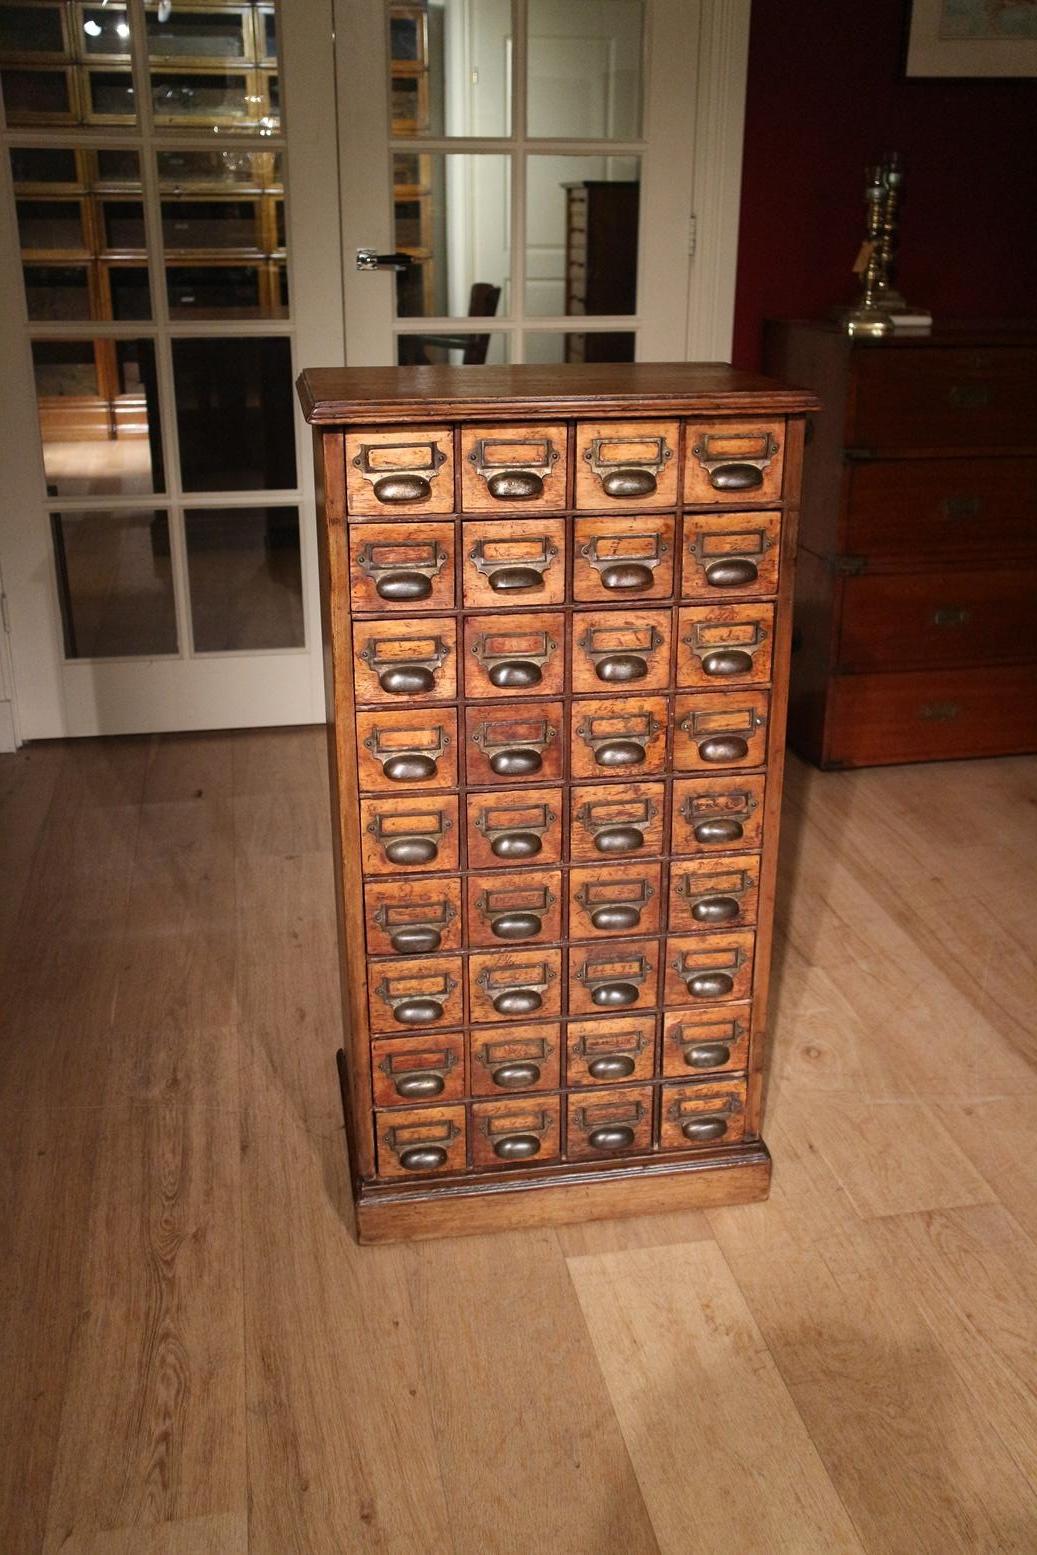 Small drawer unit
Beautiful antique chest of drawers of fruit wood with 36 drawers. Beautiful patina
Origin: England
Period: approx. 1900
Size: 53 cm x 31 cm x H 100 cm.